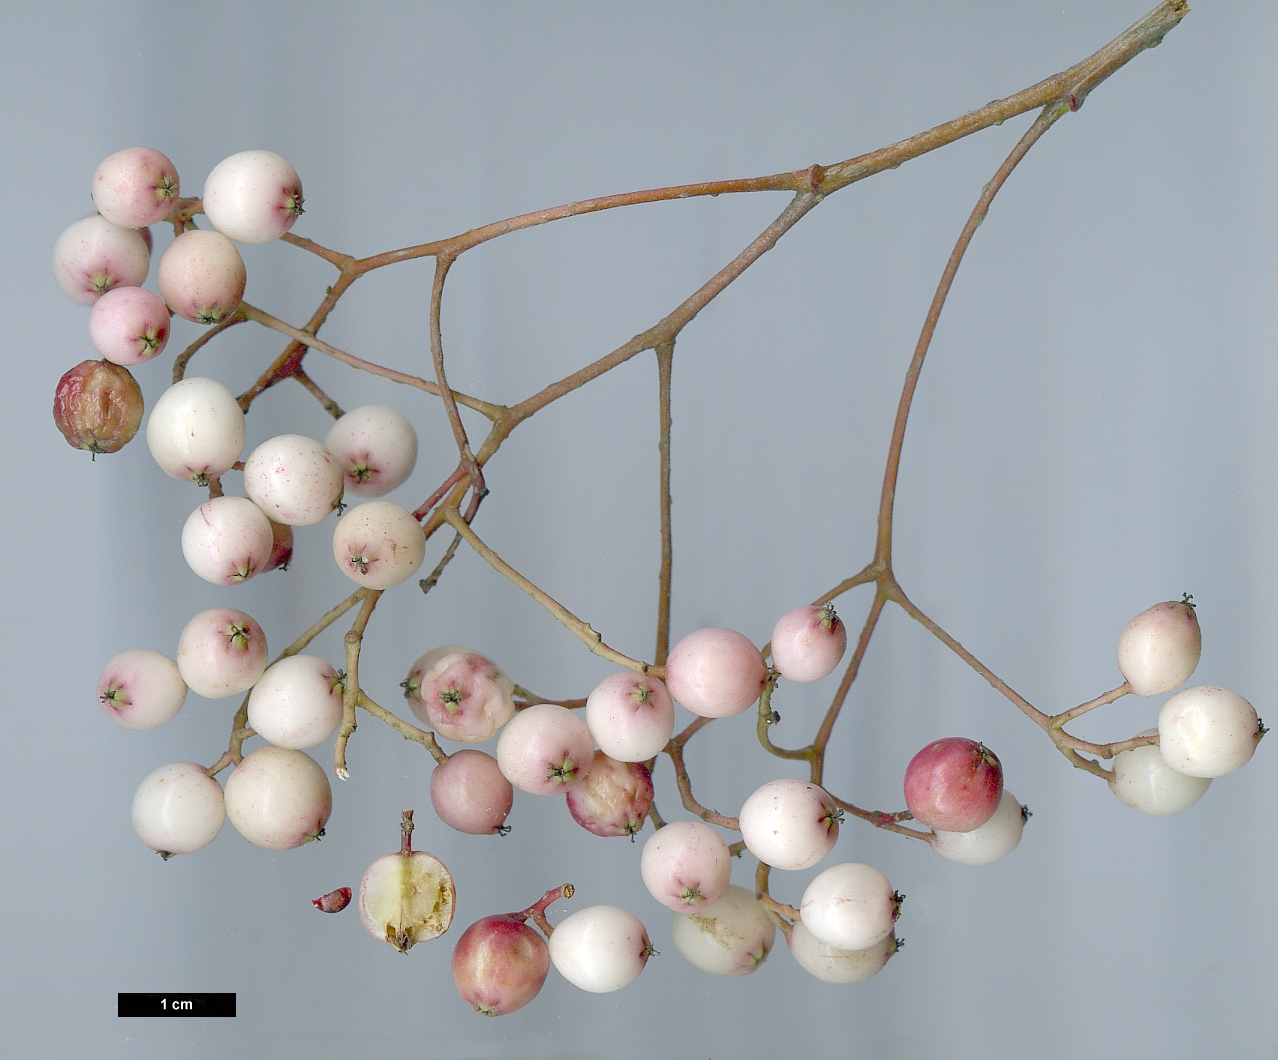 High resolution image: Family: Rosaceae - Genus: Sorbus - Taxon: microphylla agg.